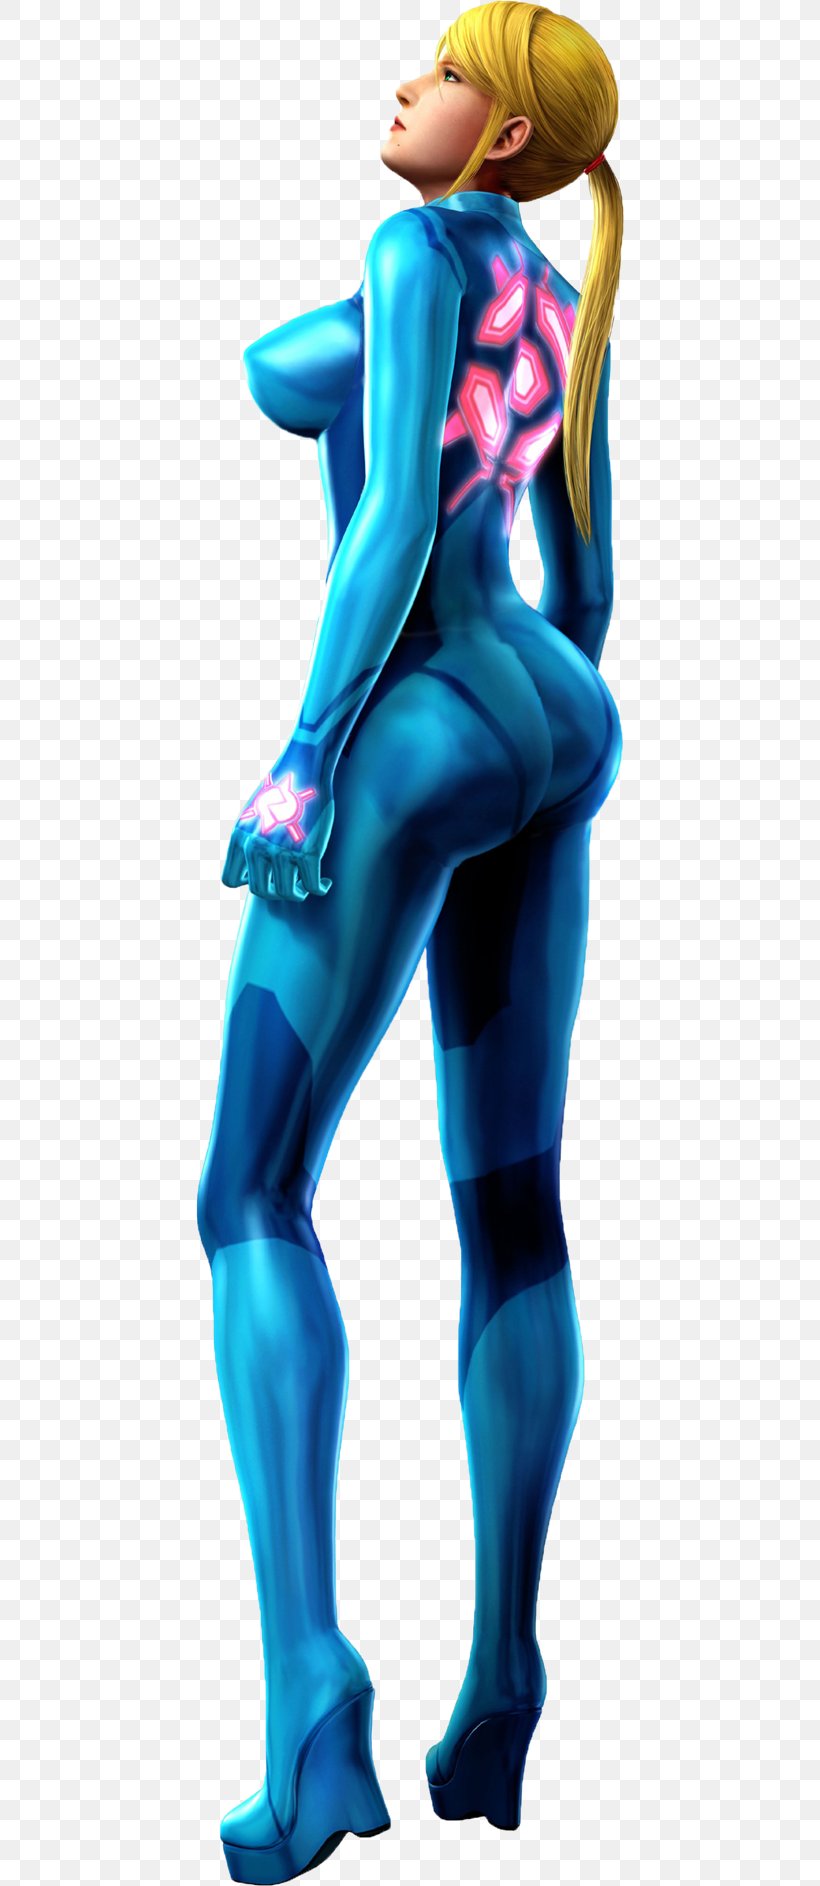 Metroid: Other M Metroid: Zero Mission Super Smash Bros. Brawl Super Smash Bros. For Nintendo 3DS And Wii U, PNG, 428x1886px, Metroid Other M, Clothing, Cosplay, Costume, Electric Blue Download Free